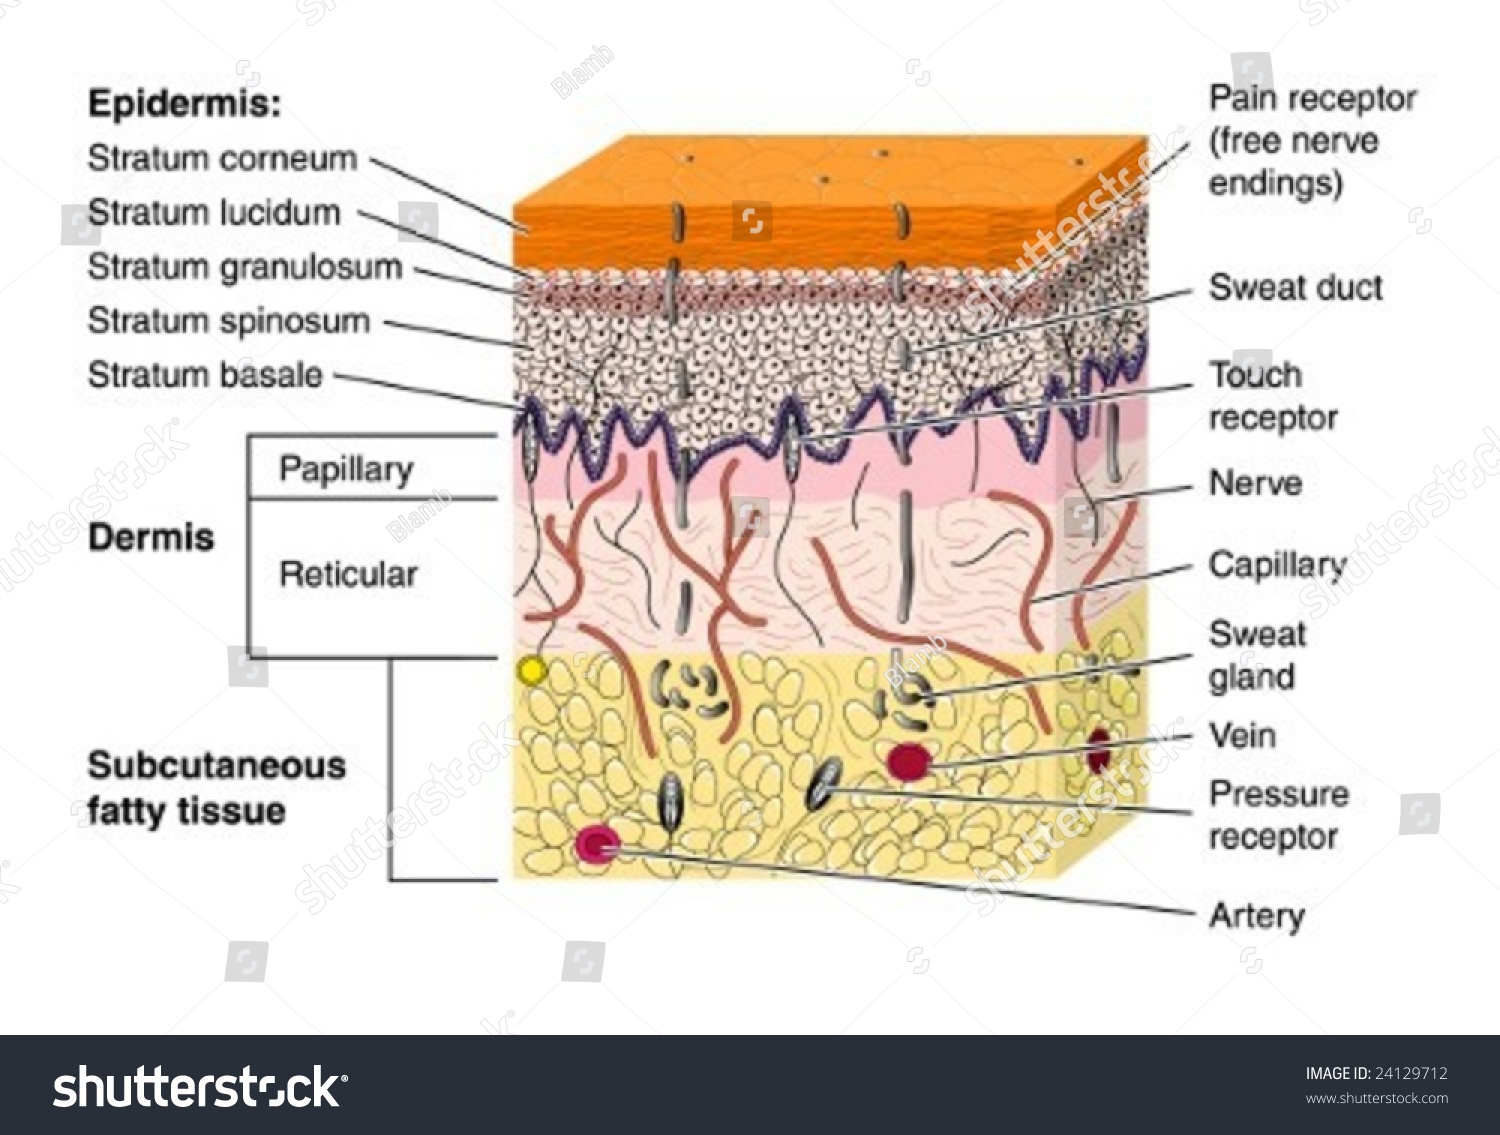 [DIAGRAM] A Labeled Diagram Of The Cross Section Of The Skin ...